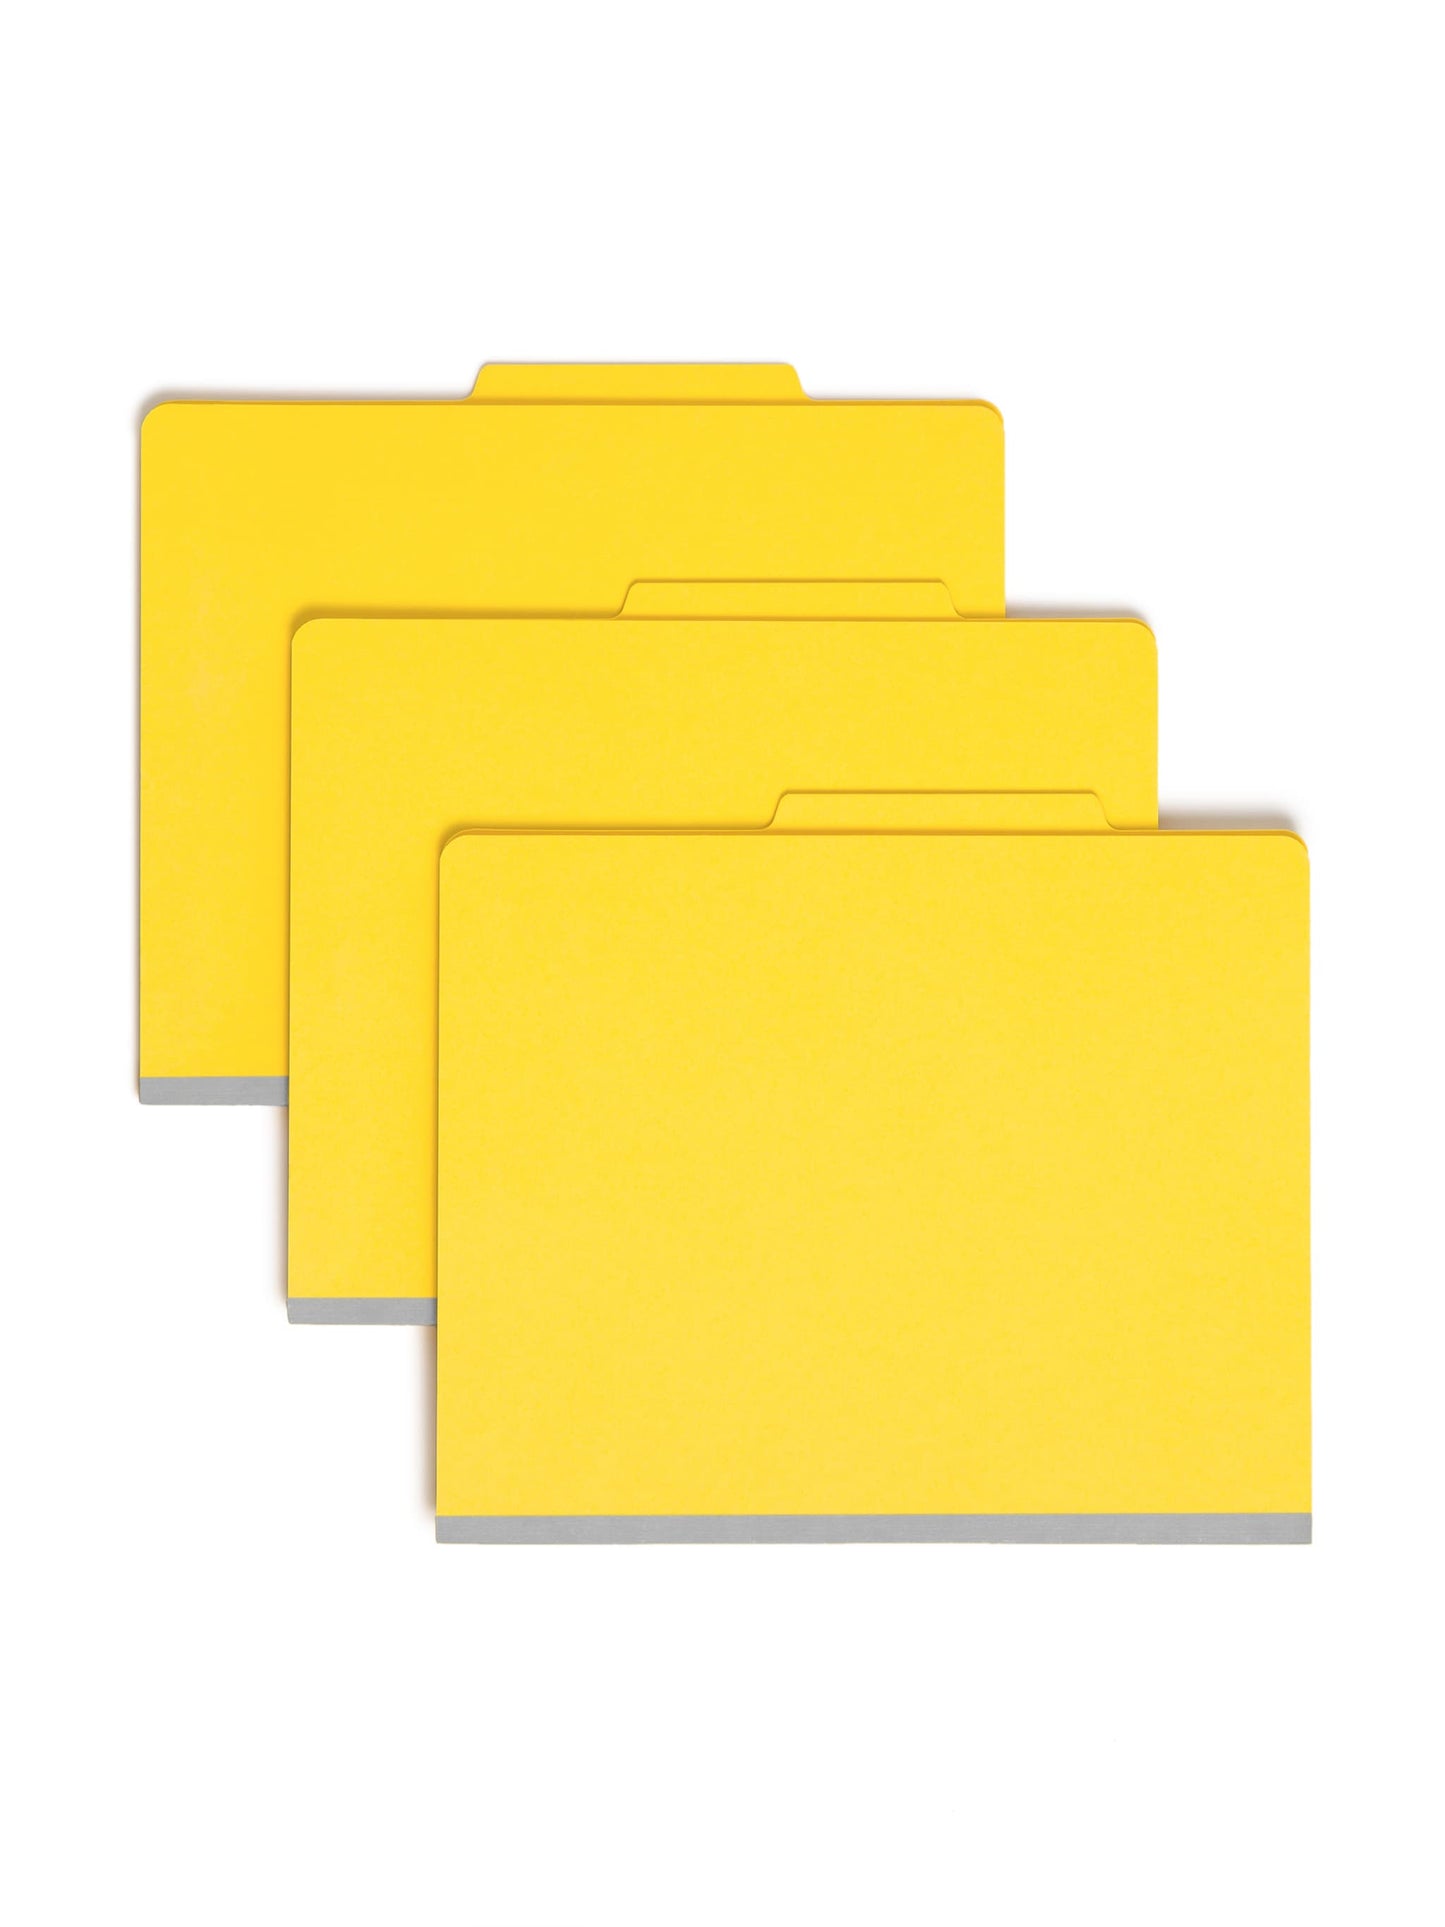 Classification File Folders, 1 Divider, 2 inch Expansion, Yellow Color, Letter Size, Set of 0, 30086486137042